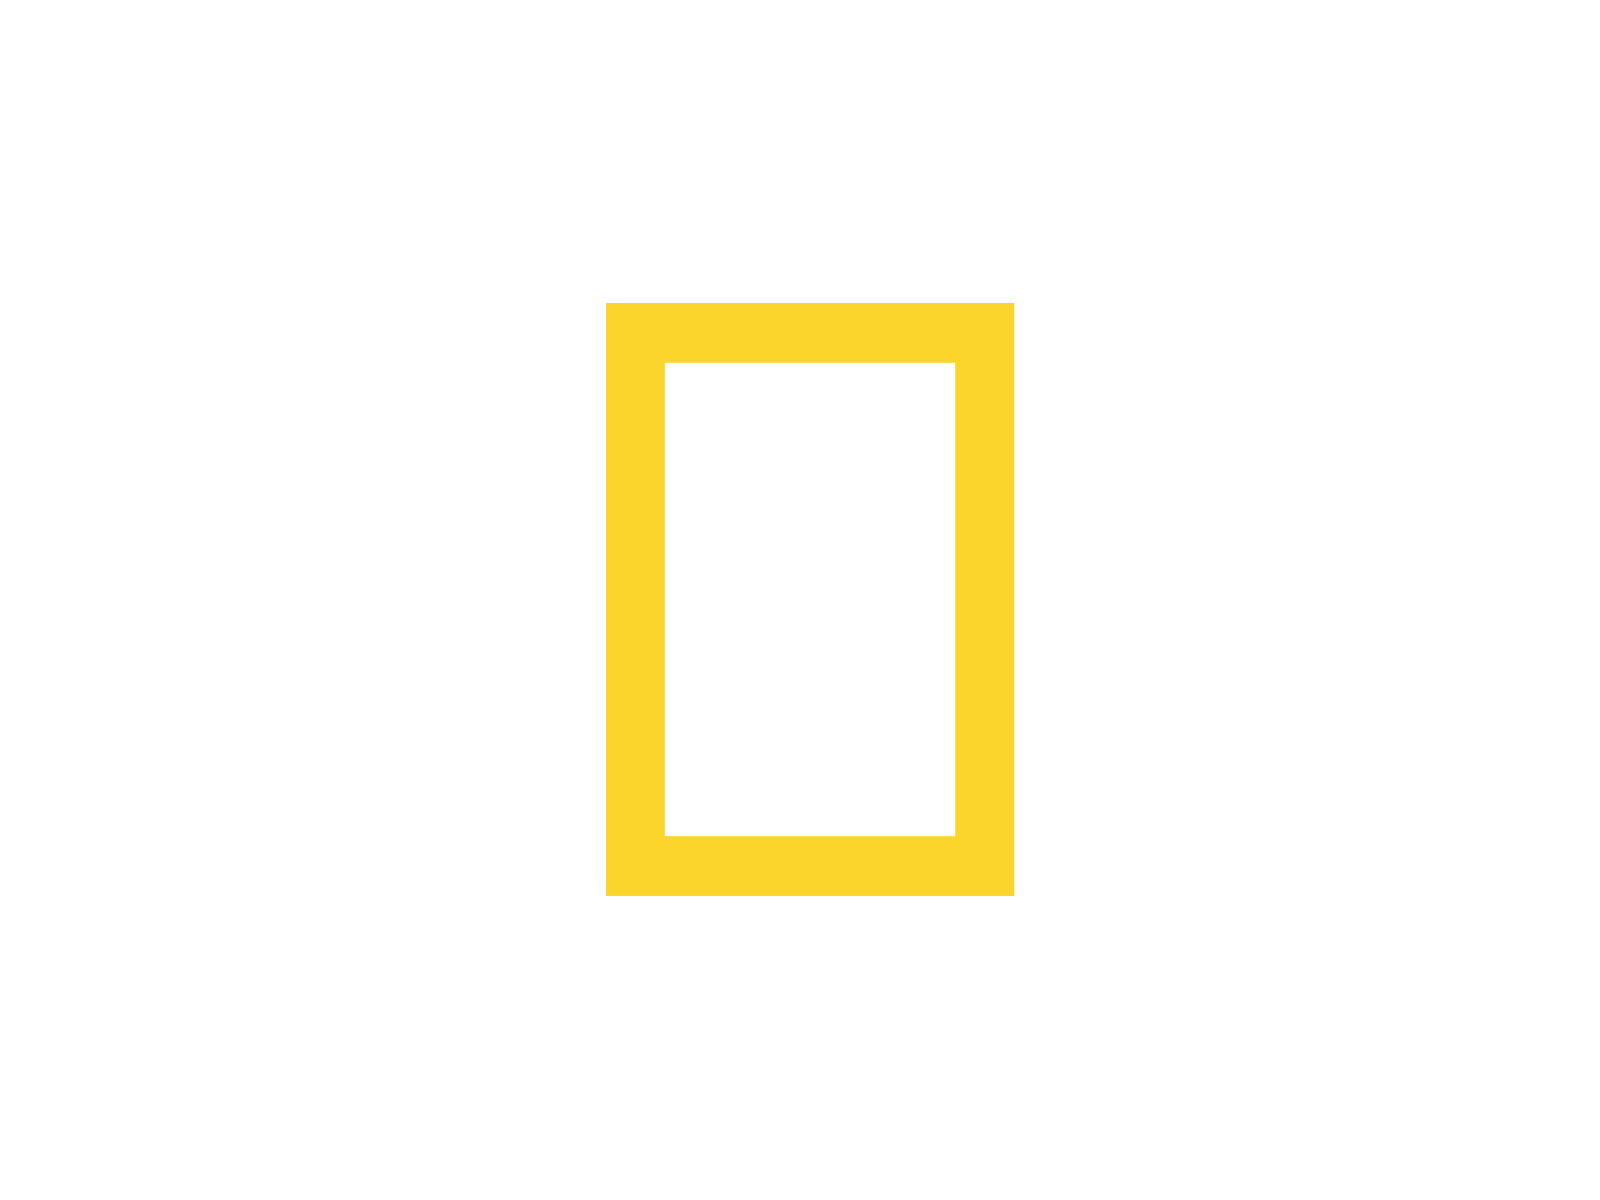 Yellow Square with Channel Logo - National Geographic logo